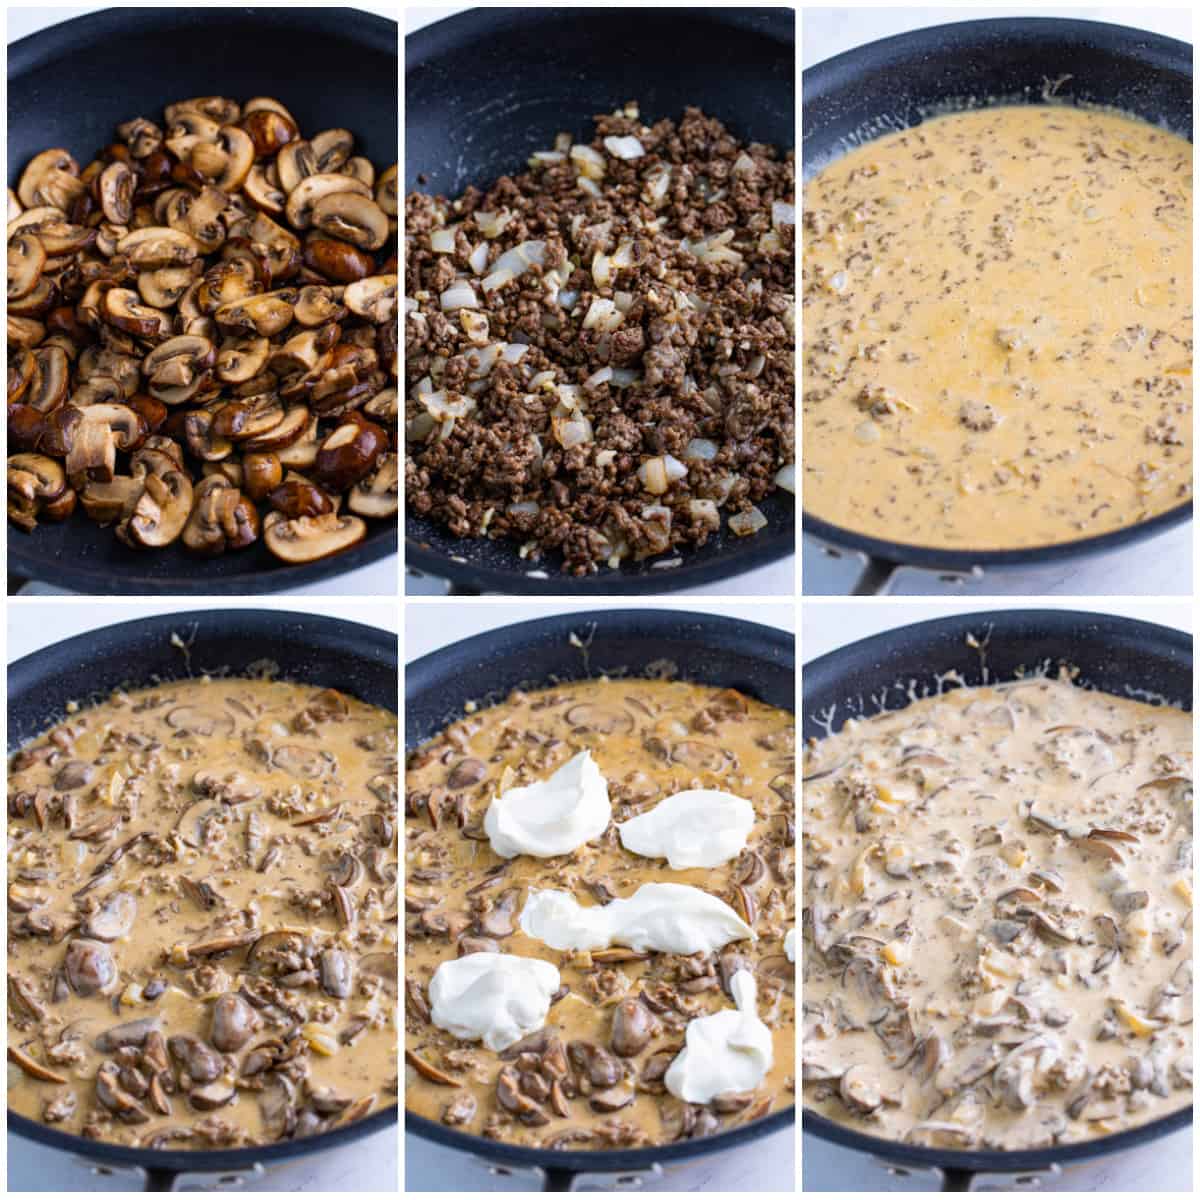 Step by step photos on how to make Ground Beef Stroganoff.